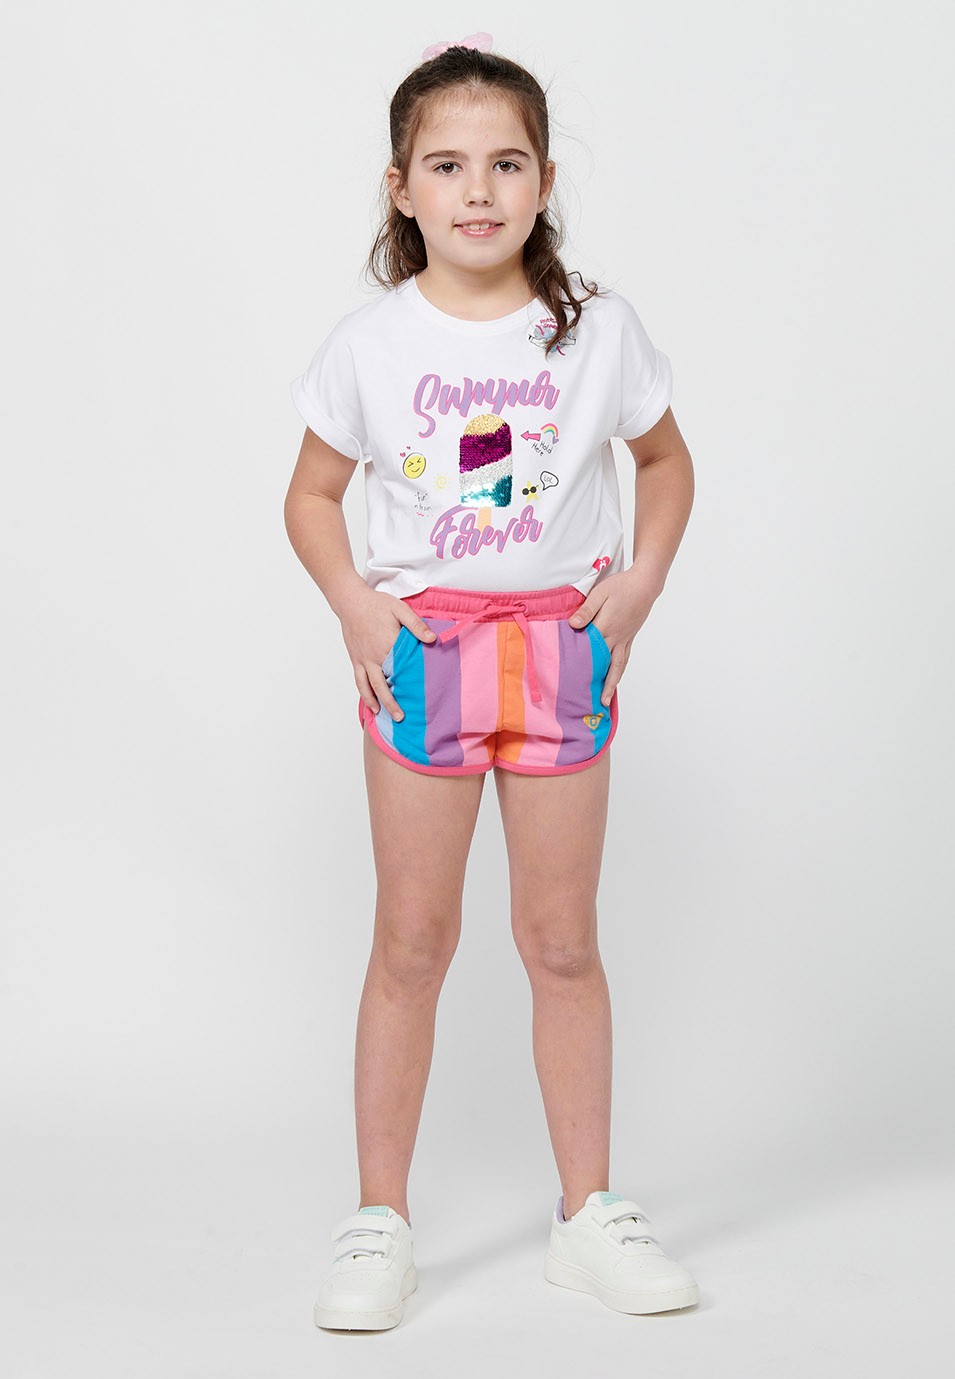 Pink Shorts with Adjustable Rubberized Waistband with Drawstring and Striped Fabric for Girls